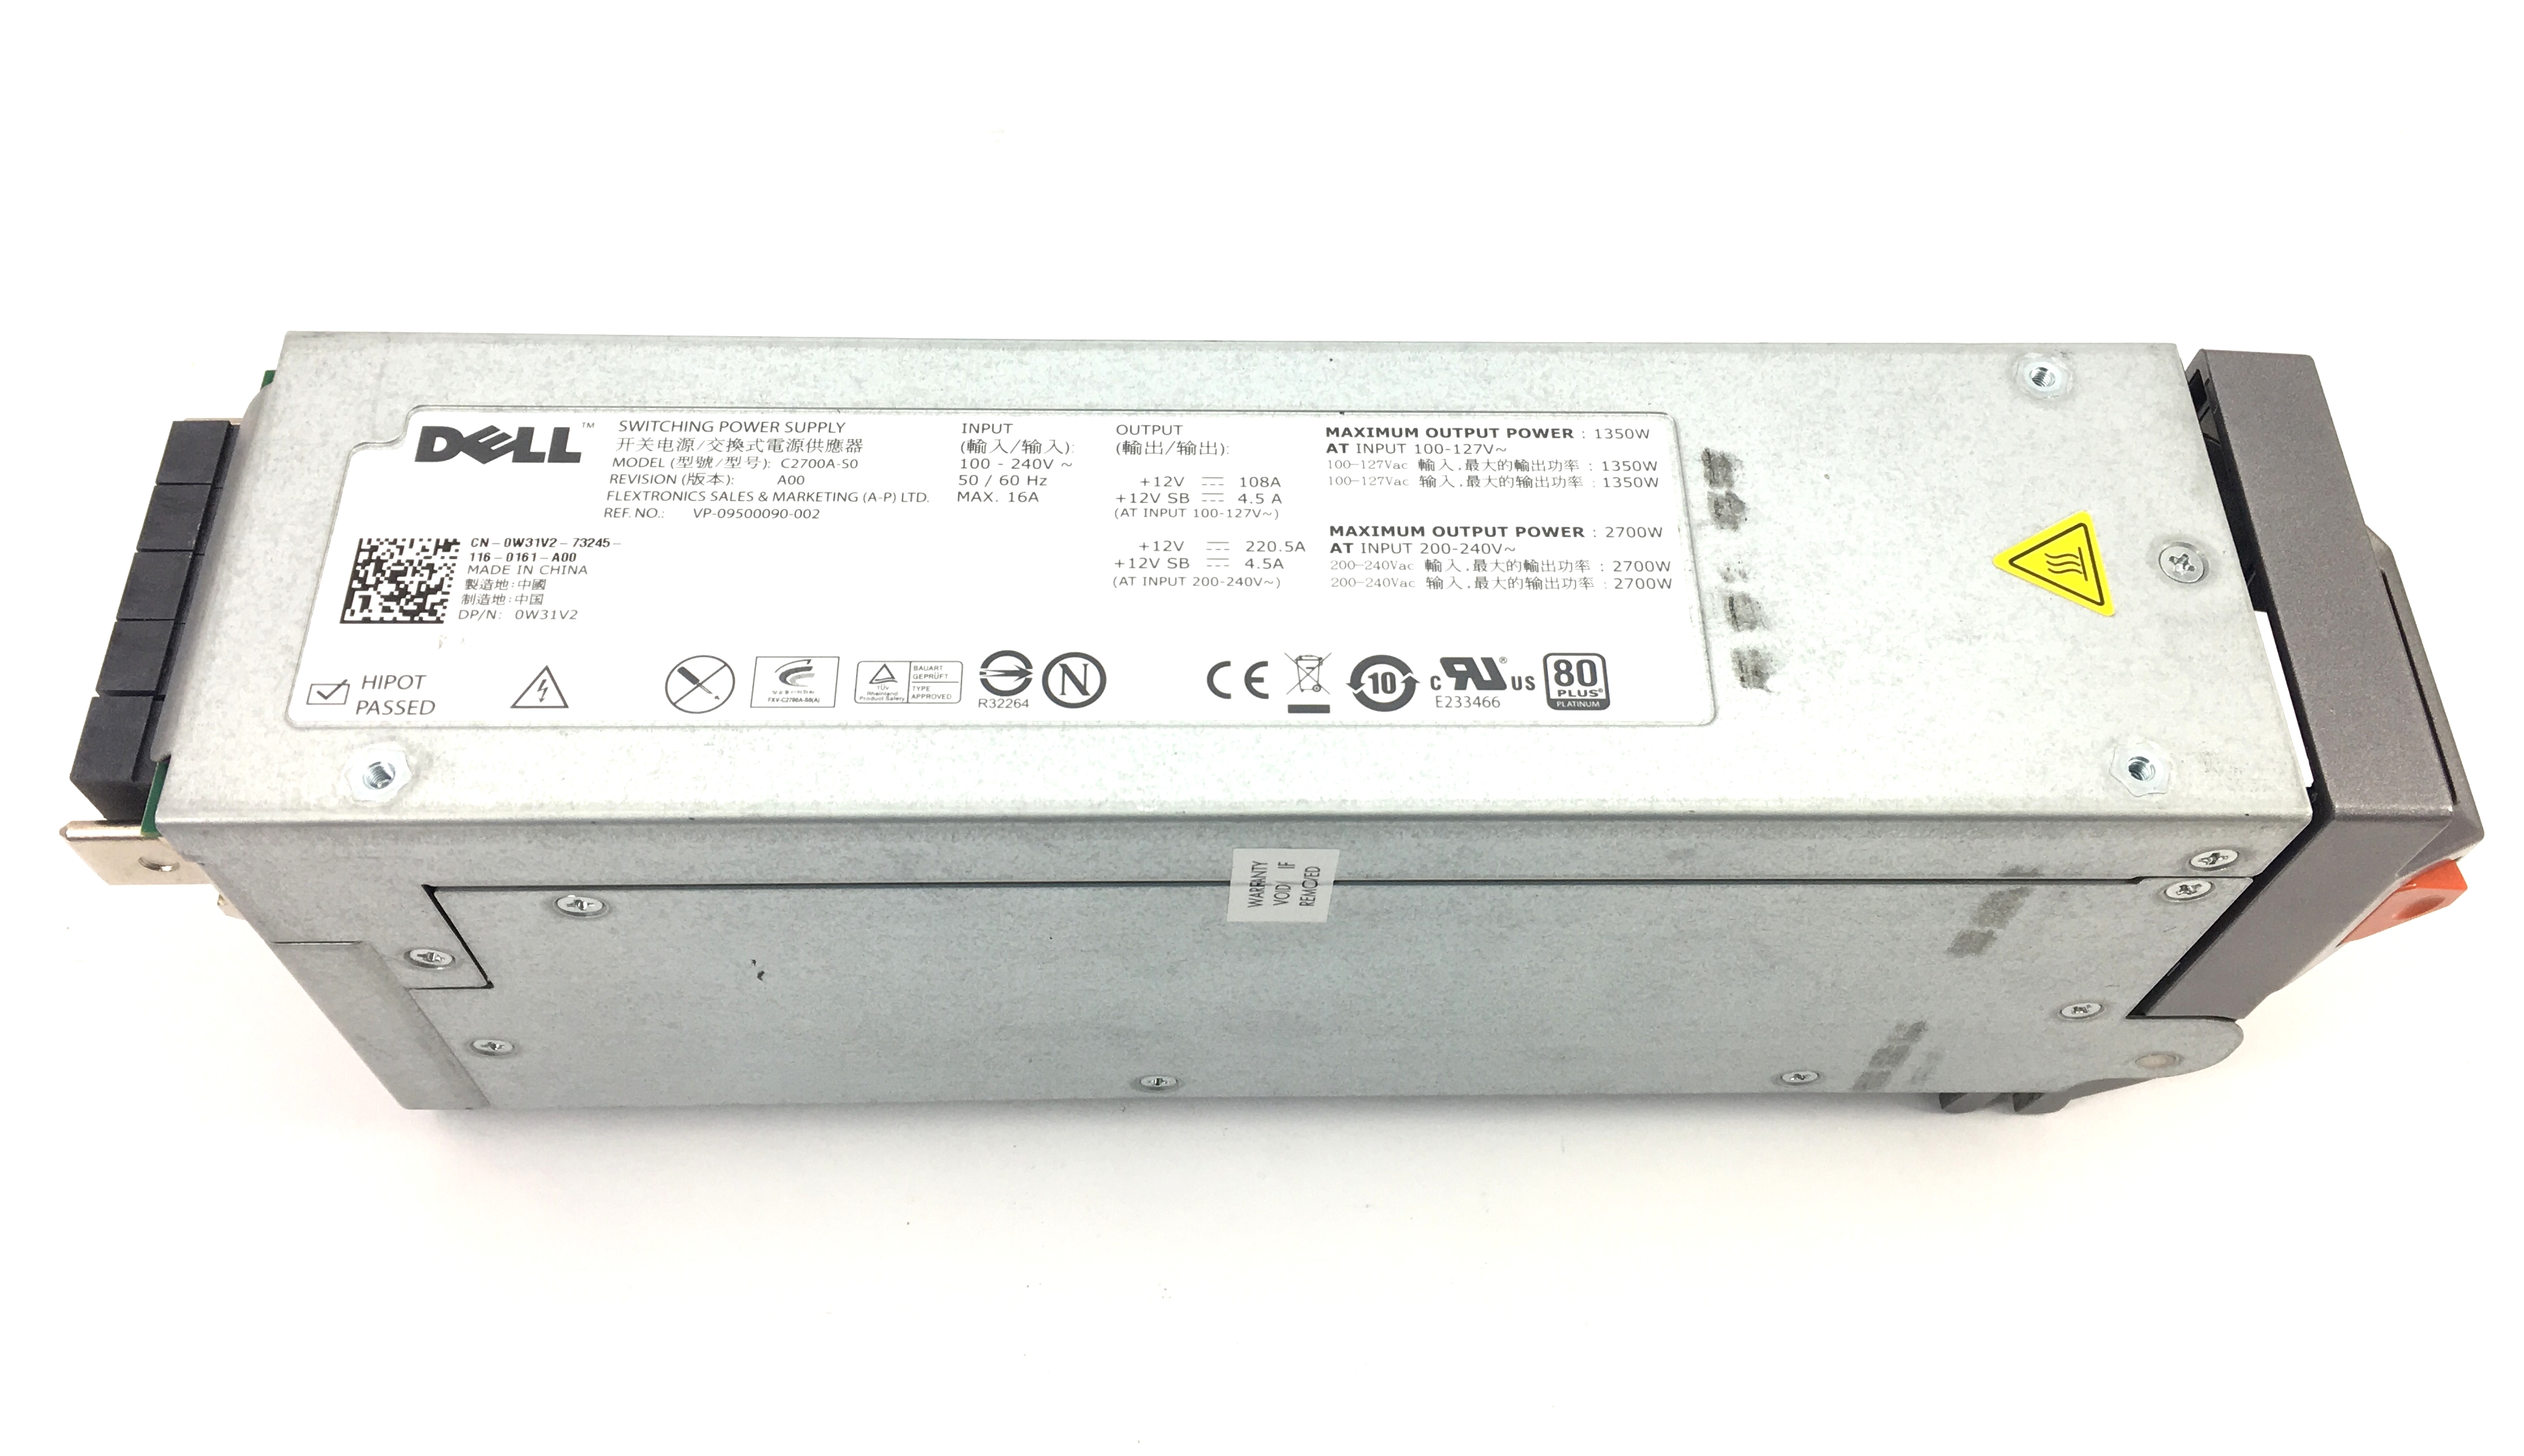 Dell PowerEdge M1000E 2700W Switching Power Supply (W31V2)